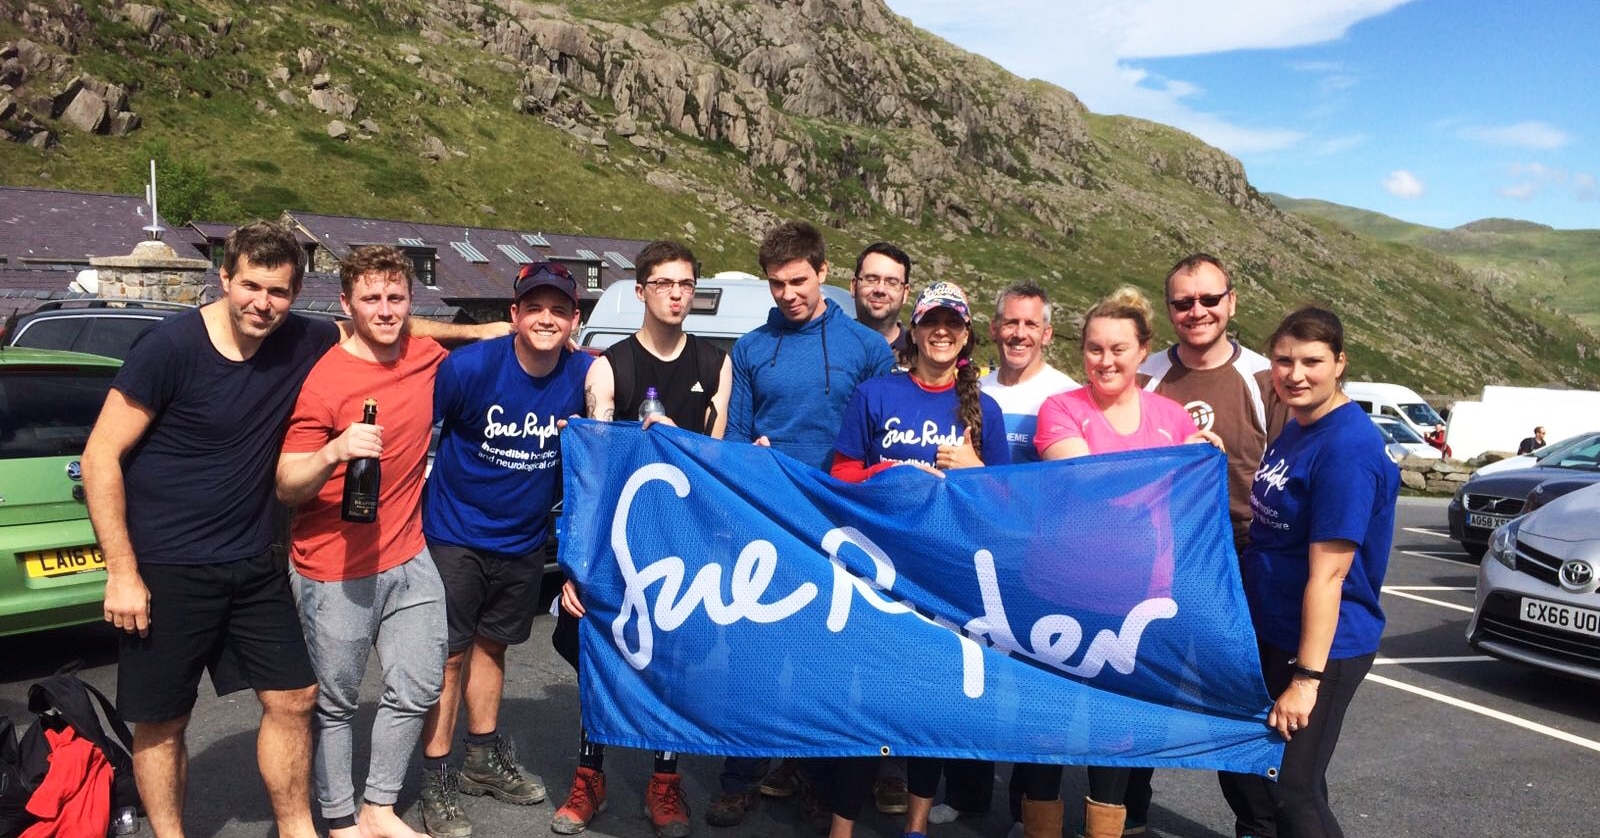 Scaling mountains in the name of charity